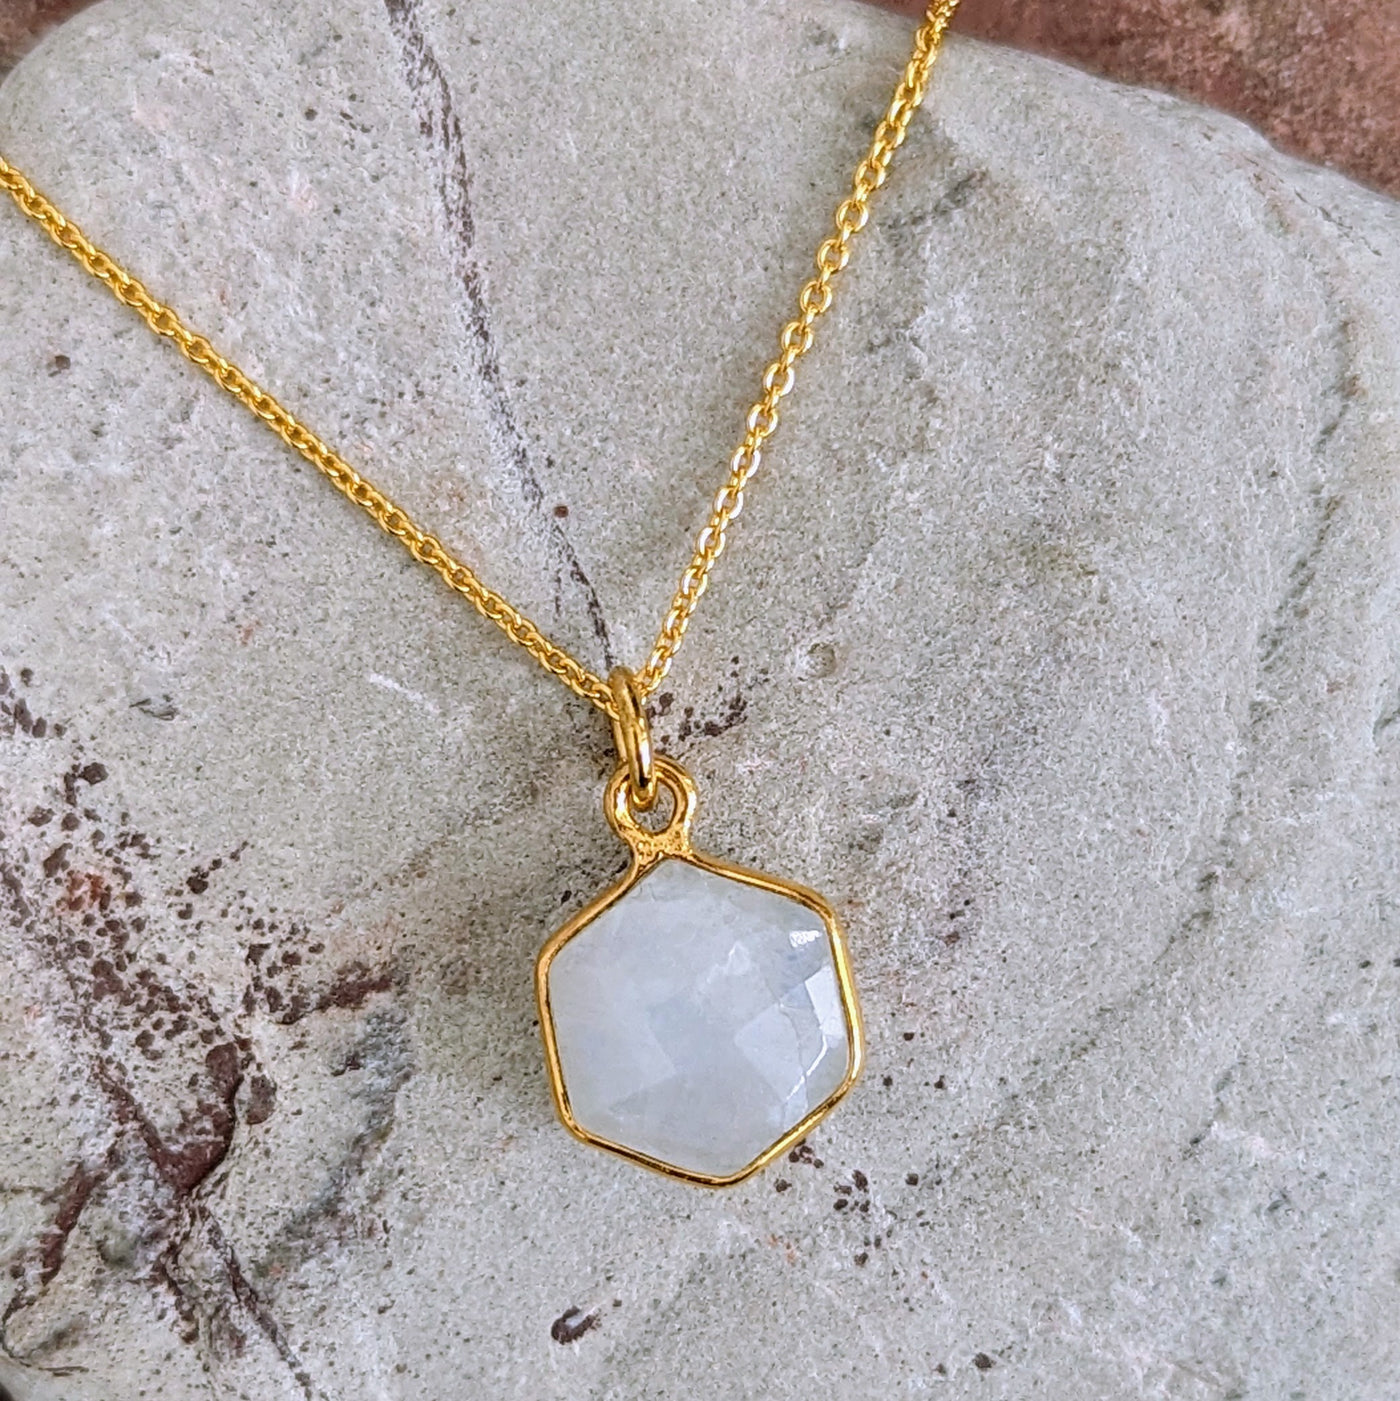 Gold plated moonstone hexagon pendant necklace